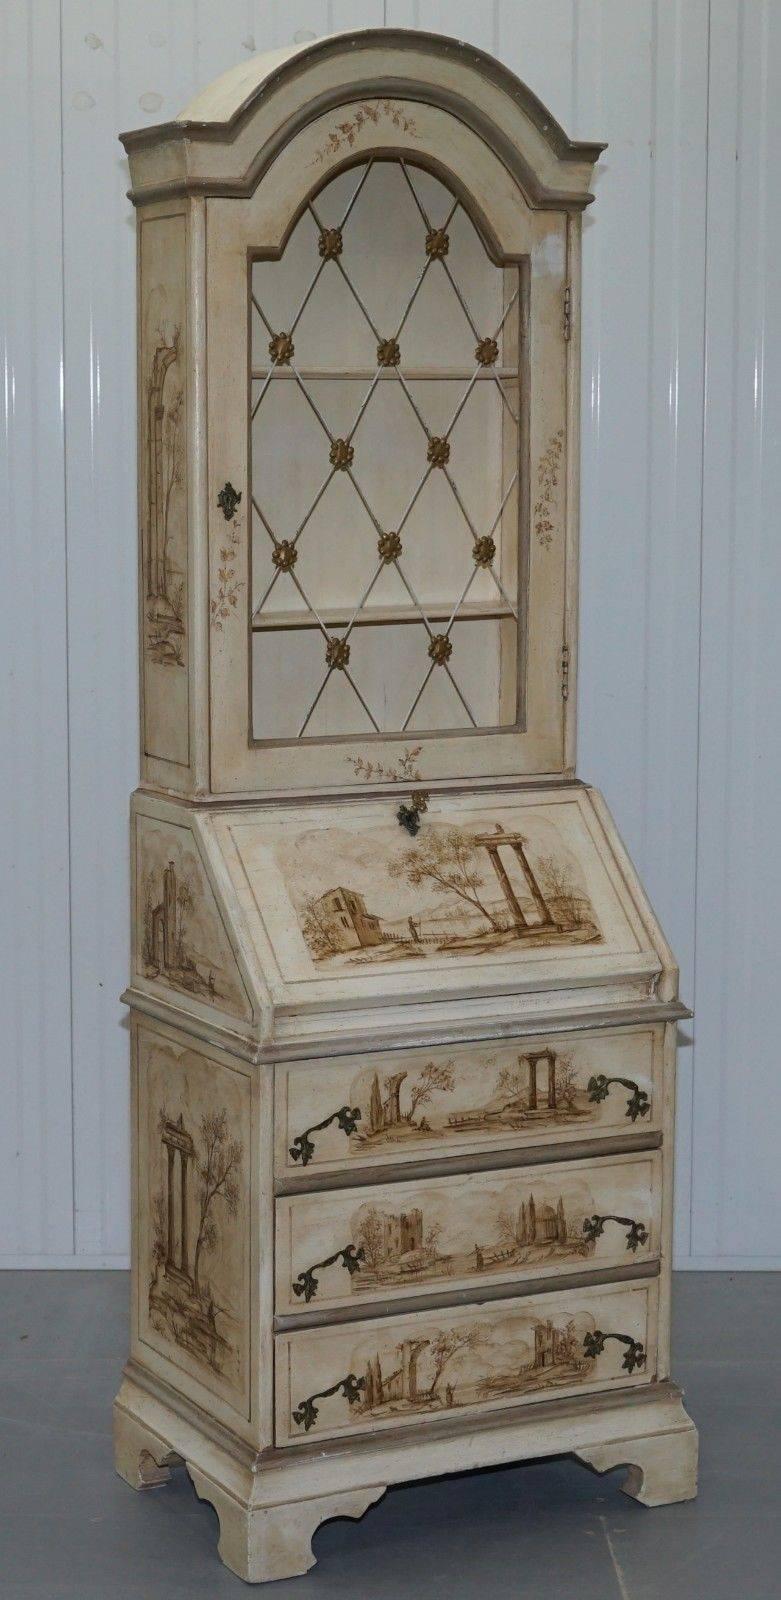 We are delighted to offer for sale this lovely hand-painted French country style bureau bookcase cabinet

A very well made and good looking piece, the finish is nicely distressed so it has the look and feel of a much old bookcase

We have deep